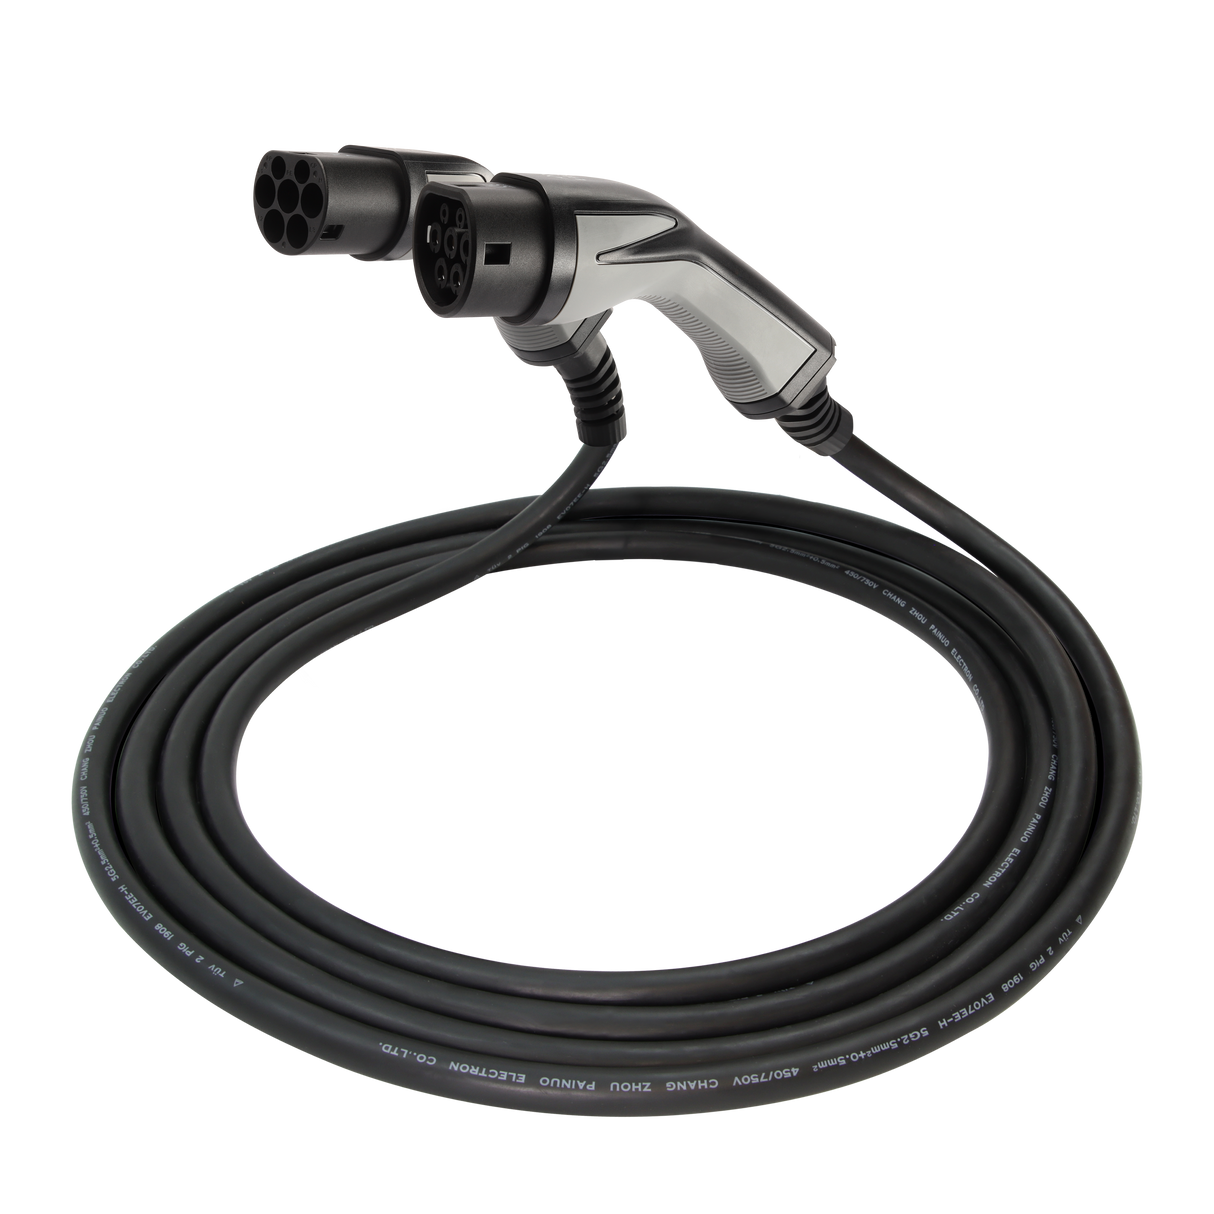 Charging cable Audi Q3 - Erock Pro Type 2 - 16A 1 phase (3.7 kW)